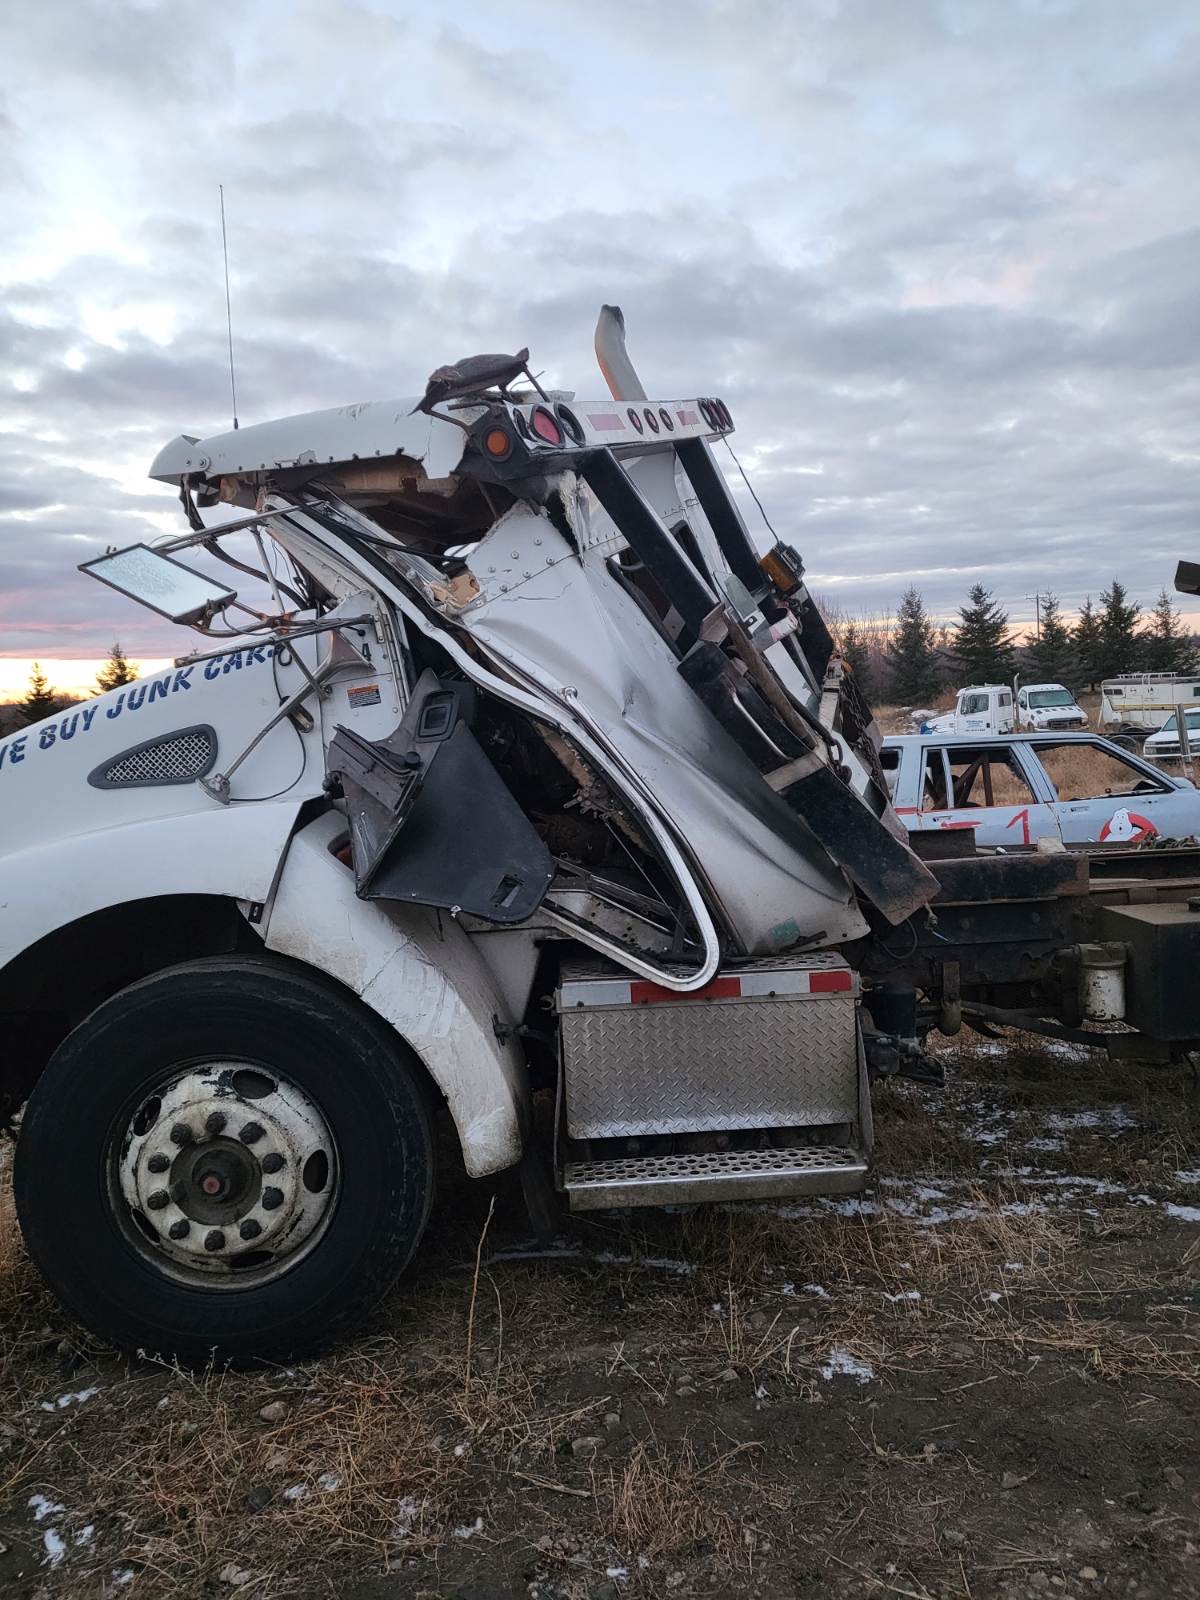 A tow truck driver suffered serious injuries after his truck was struck by a vehicle while he was responding to a call.